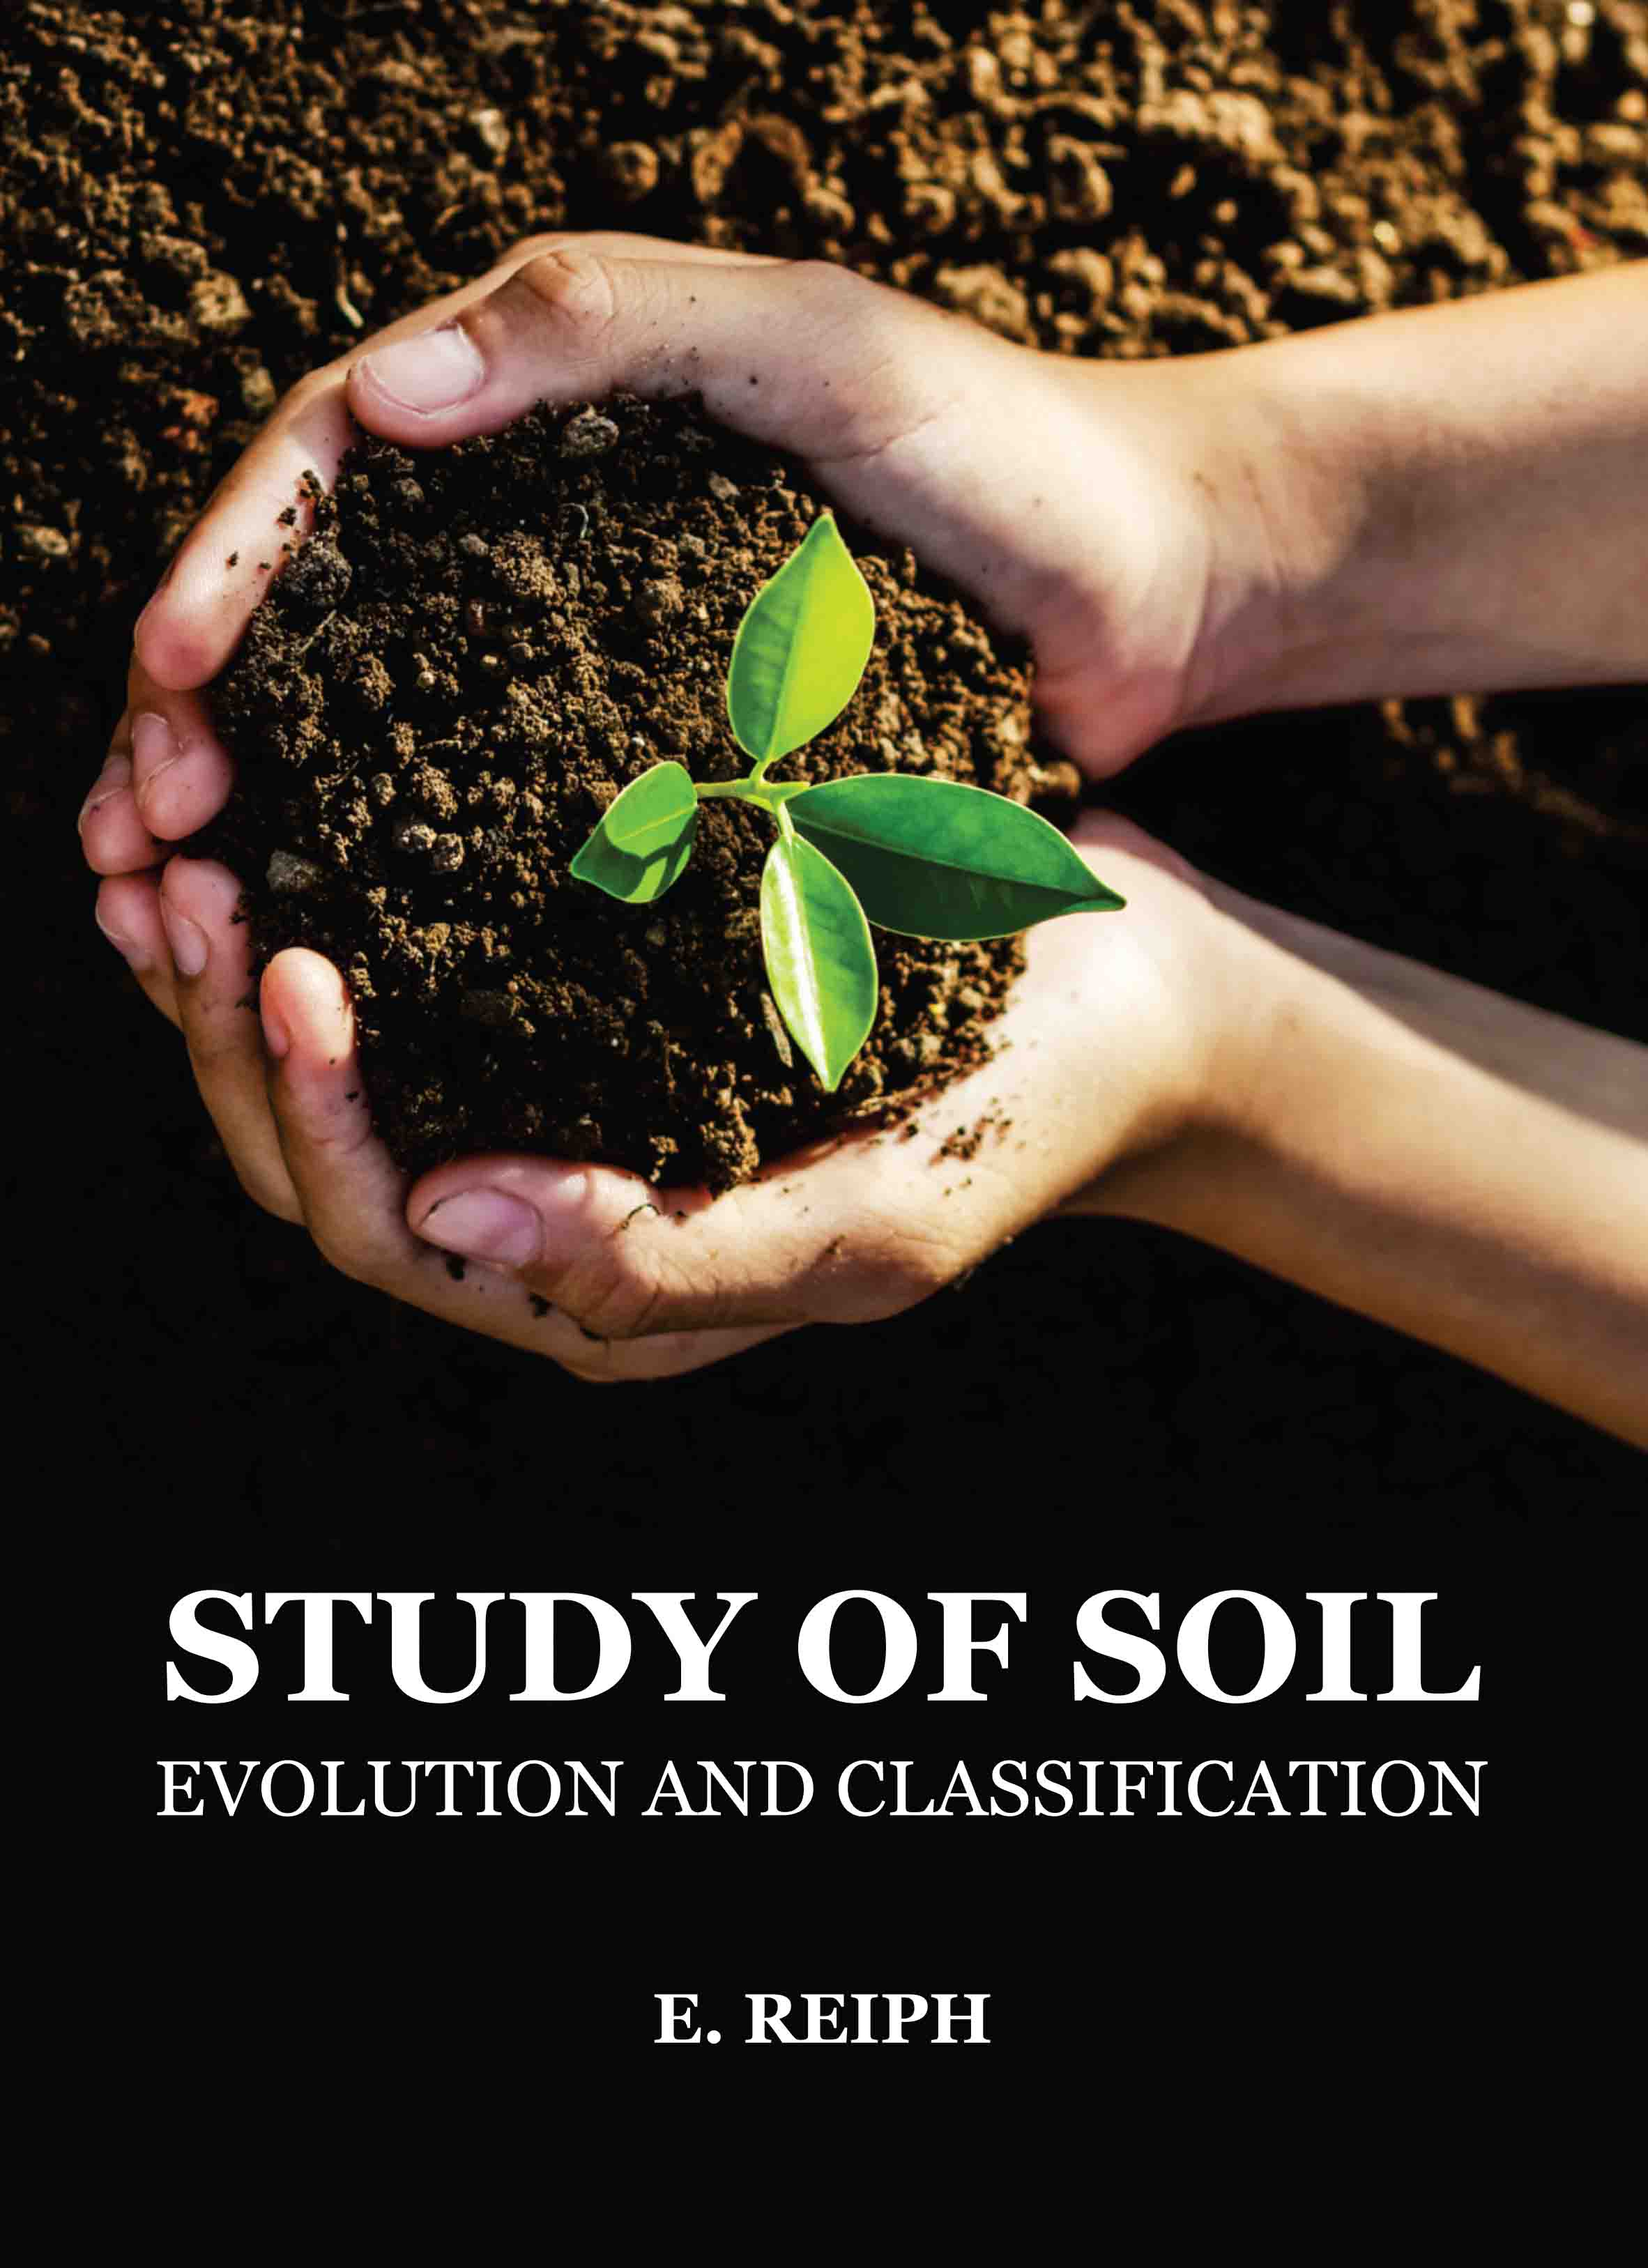 Study of Soil: Evolution and Classification